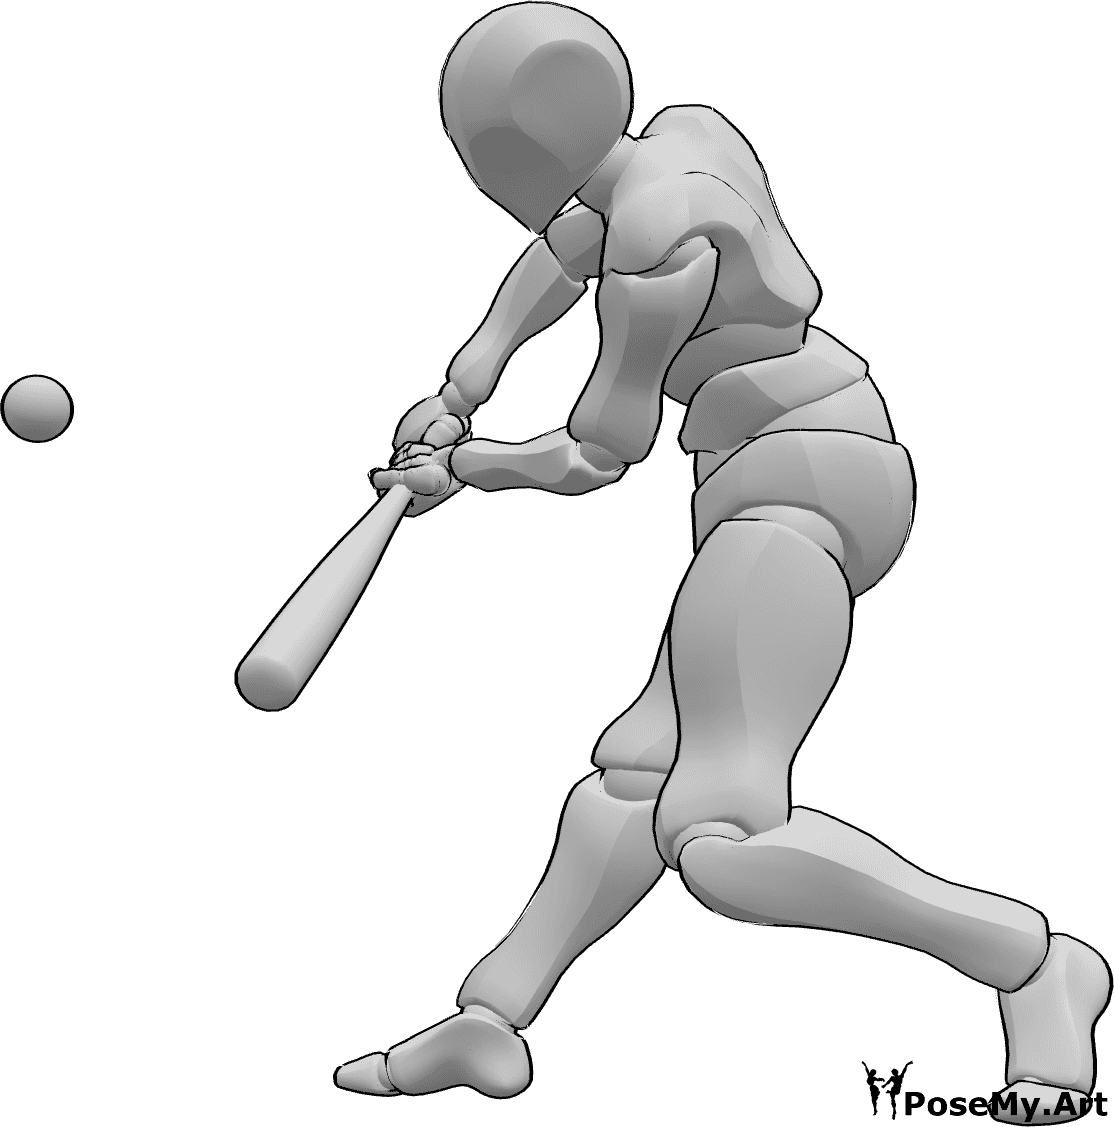 Pose Reference- Hitting low ball pose - Male baseball player is standing and hitting a low ball